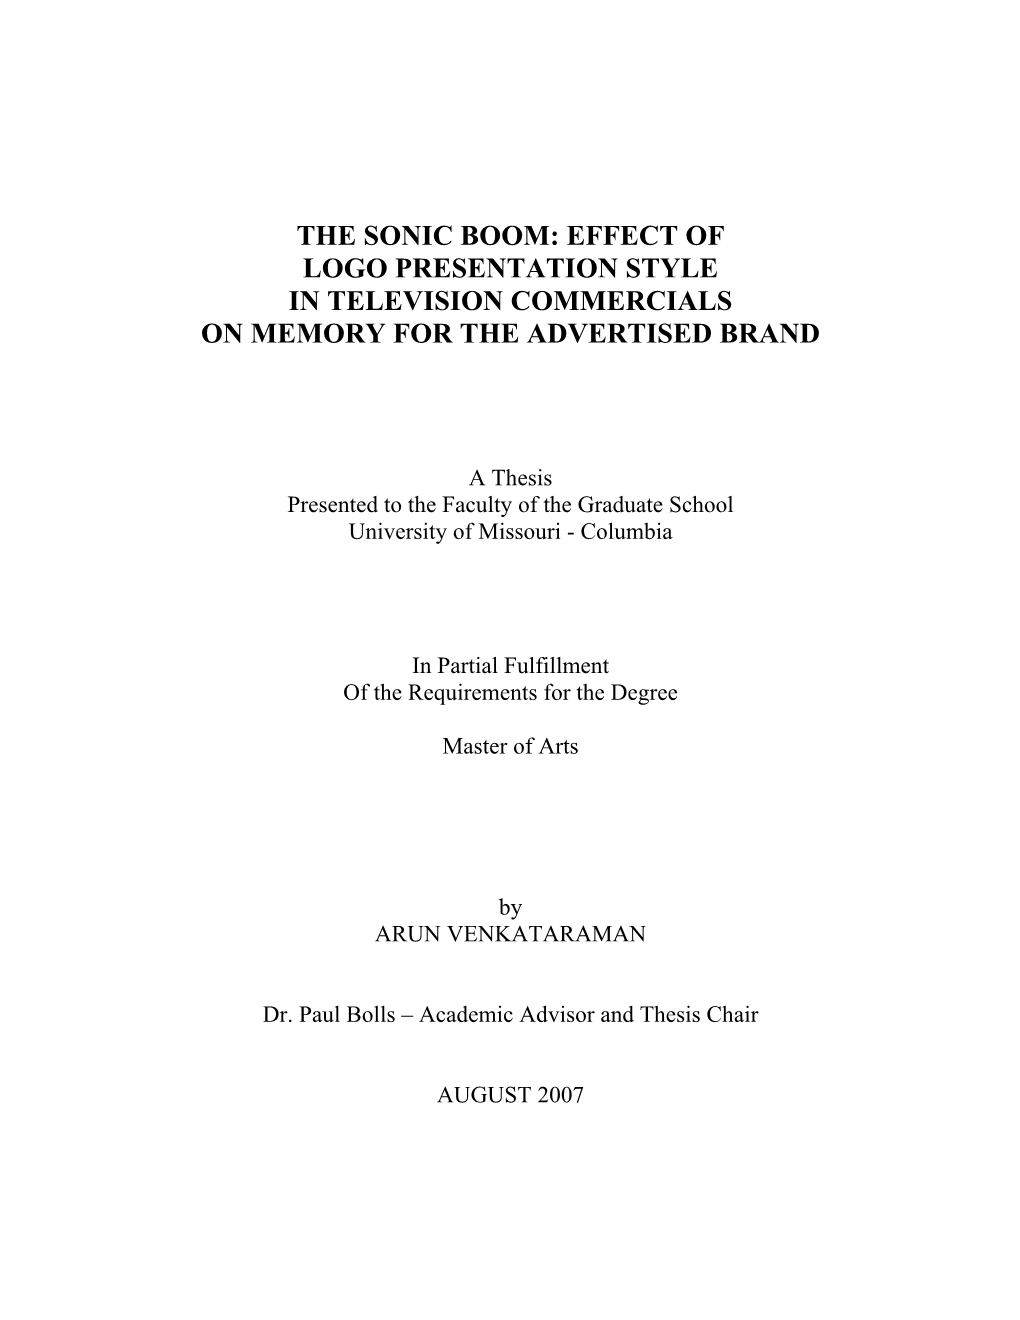 The Sonic Boom: Effect of Logo Presentation Style in Television Commercials on Memory for the Advertised Brand